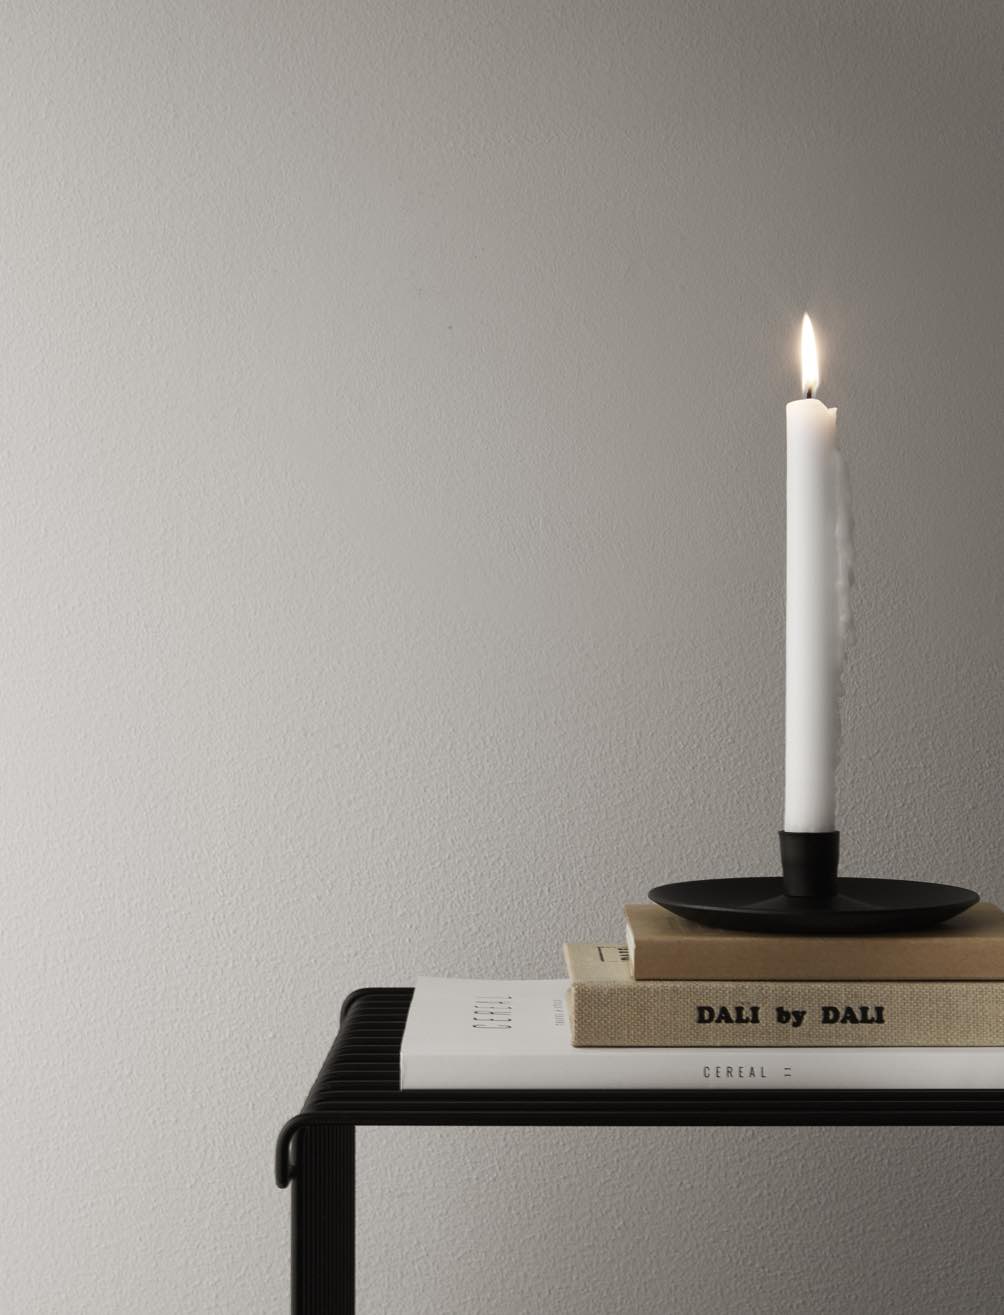 Candle Plate Black